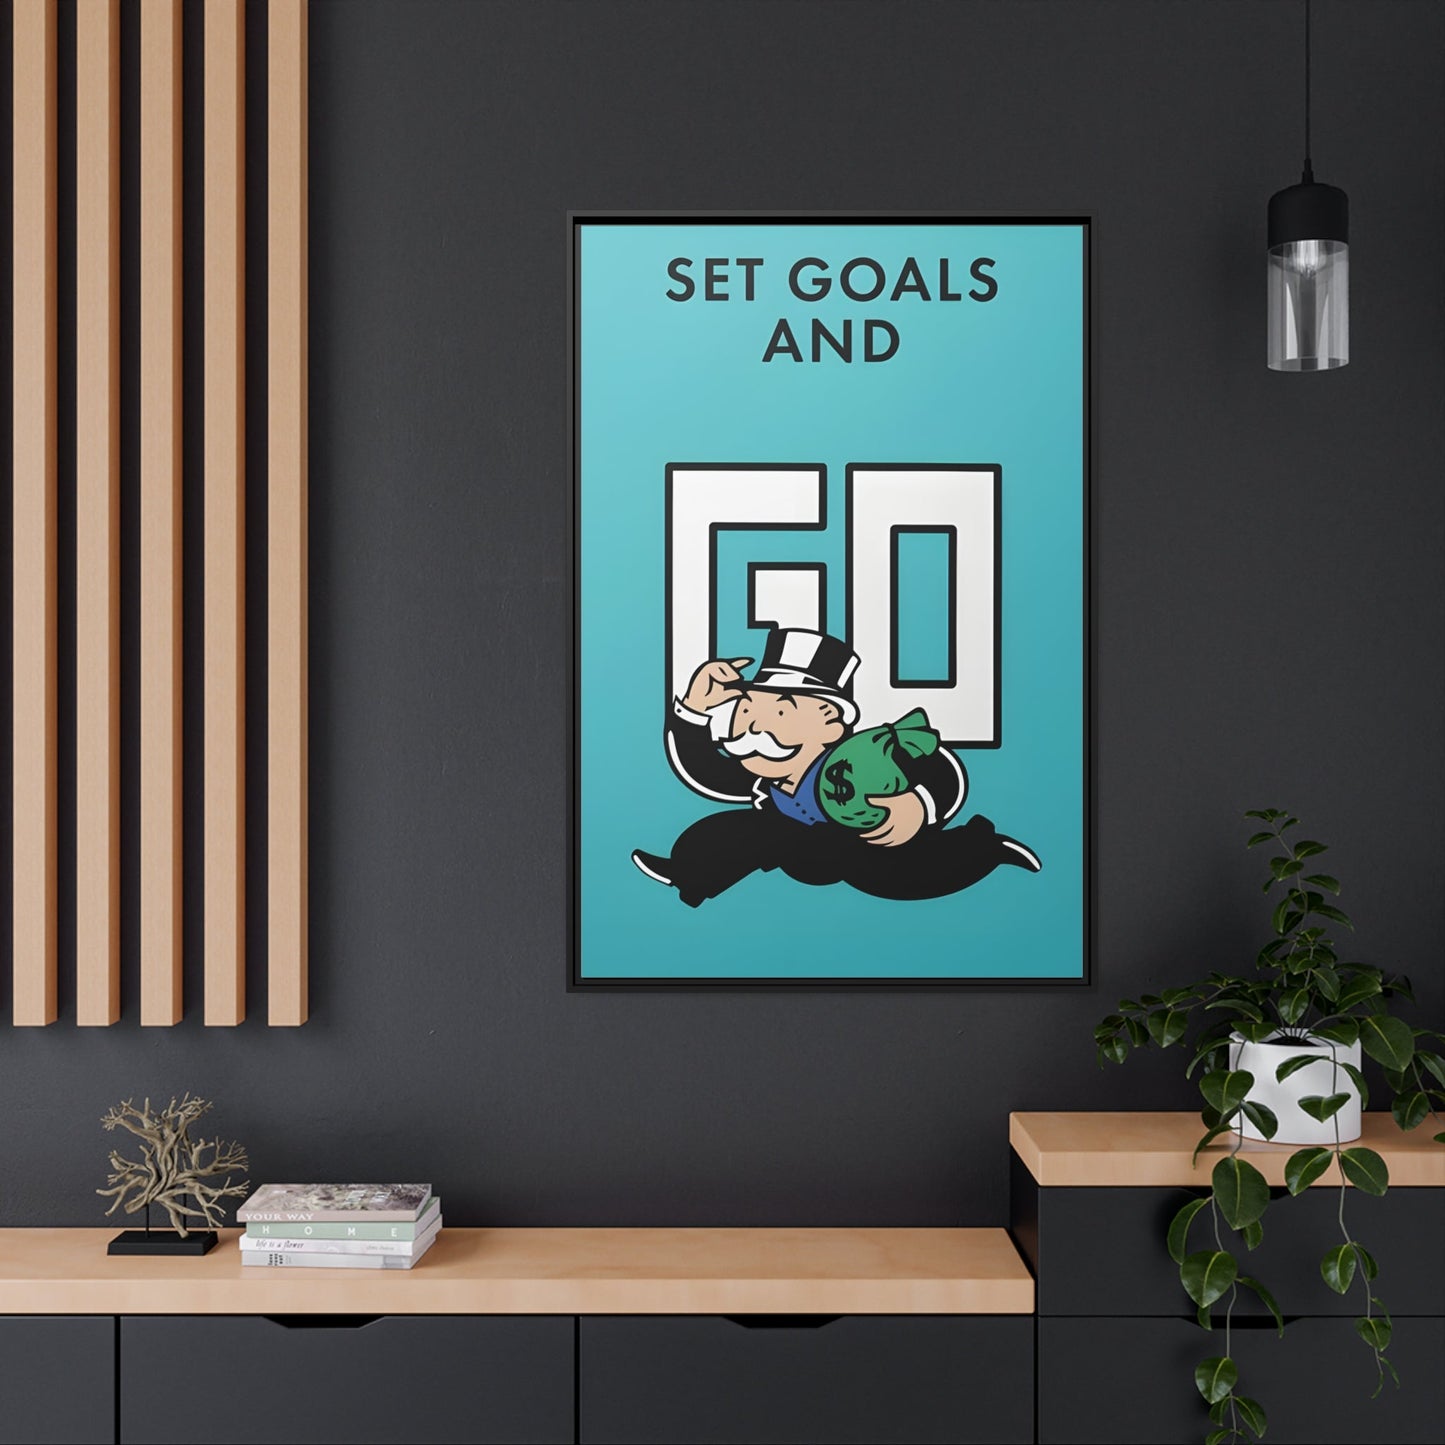 Artistic Reverie: Canvas & Poster Wall Art Inspired by Monopoly and Motivation